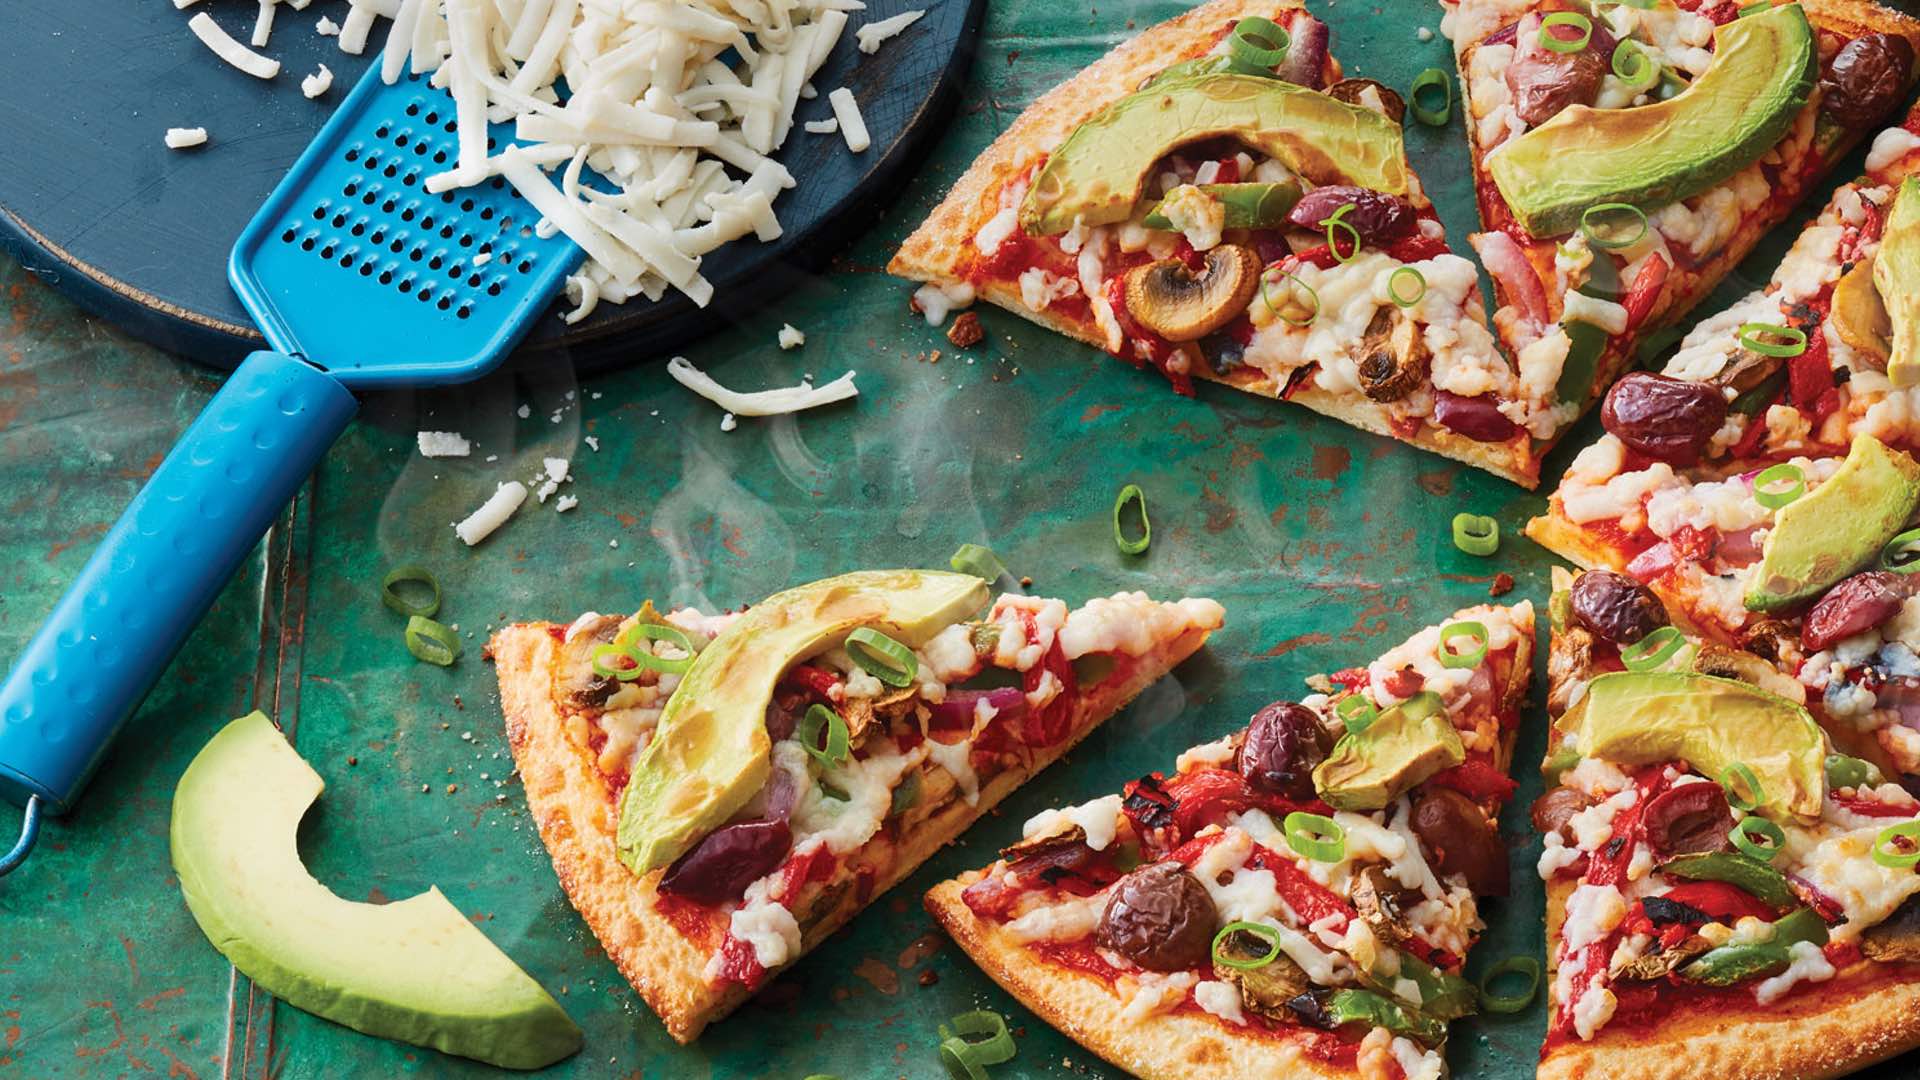 Domino's Taps Into the Vegan Cheap Pizza-Lover Market by Introducing Vegan Cheese